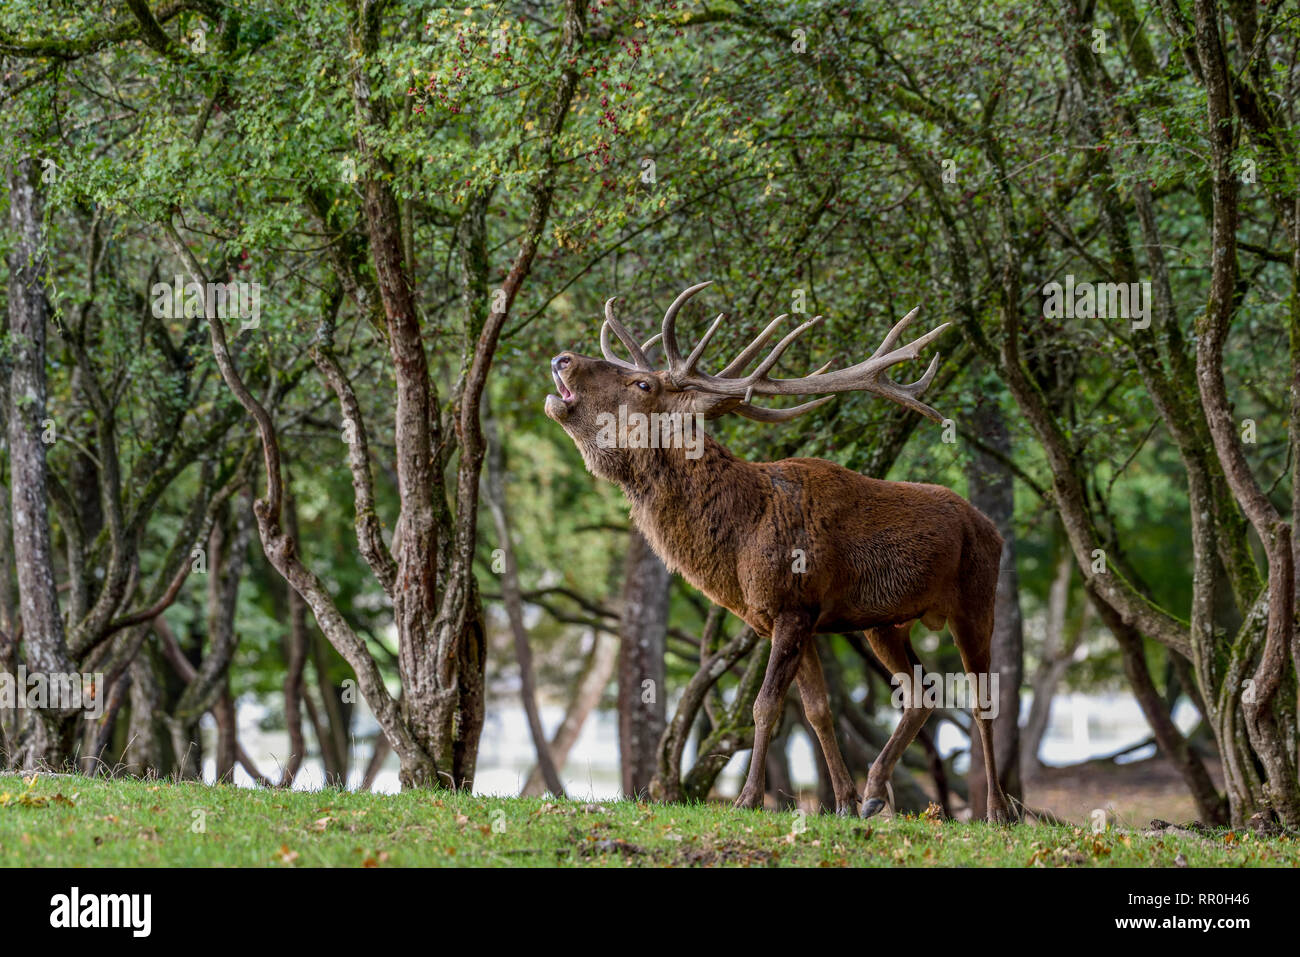 Zoologie/Tiere, Säugetiere (Mammalia), belling Rotwild Rotwild (Cervus elaphus), brünstige Tiere, Parc Ani, Additional-Rights - Clearance-Info - Not-Available Stockfoto